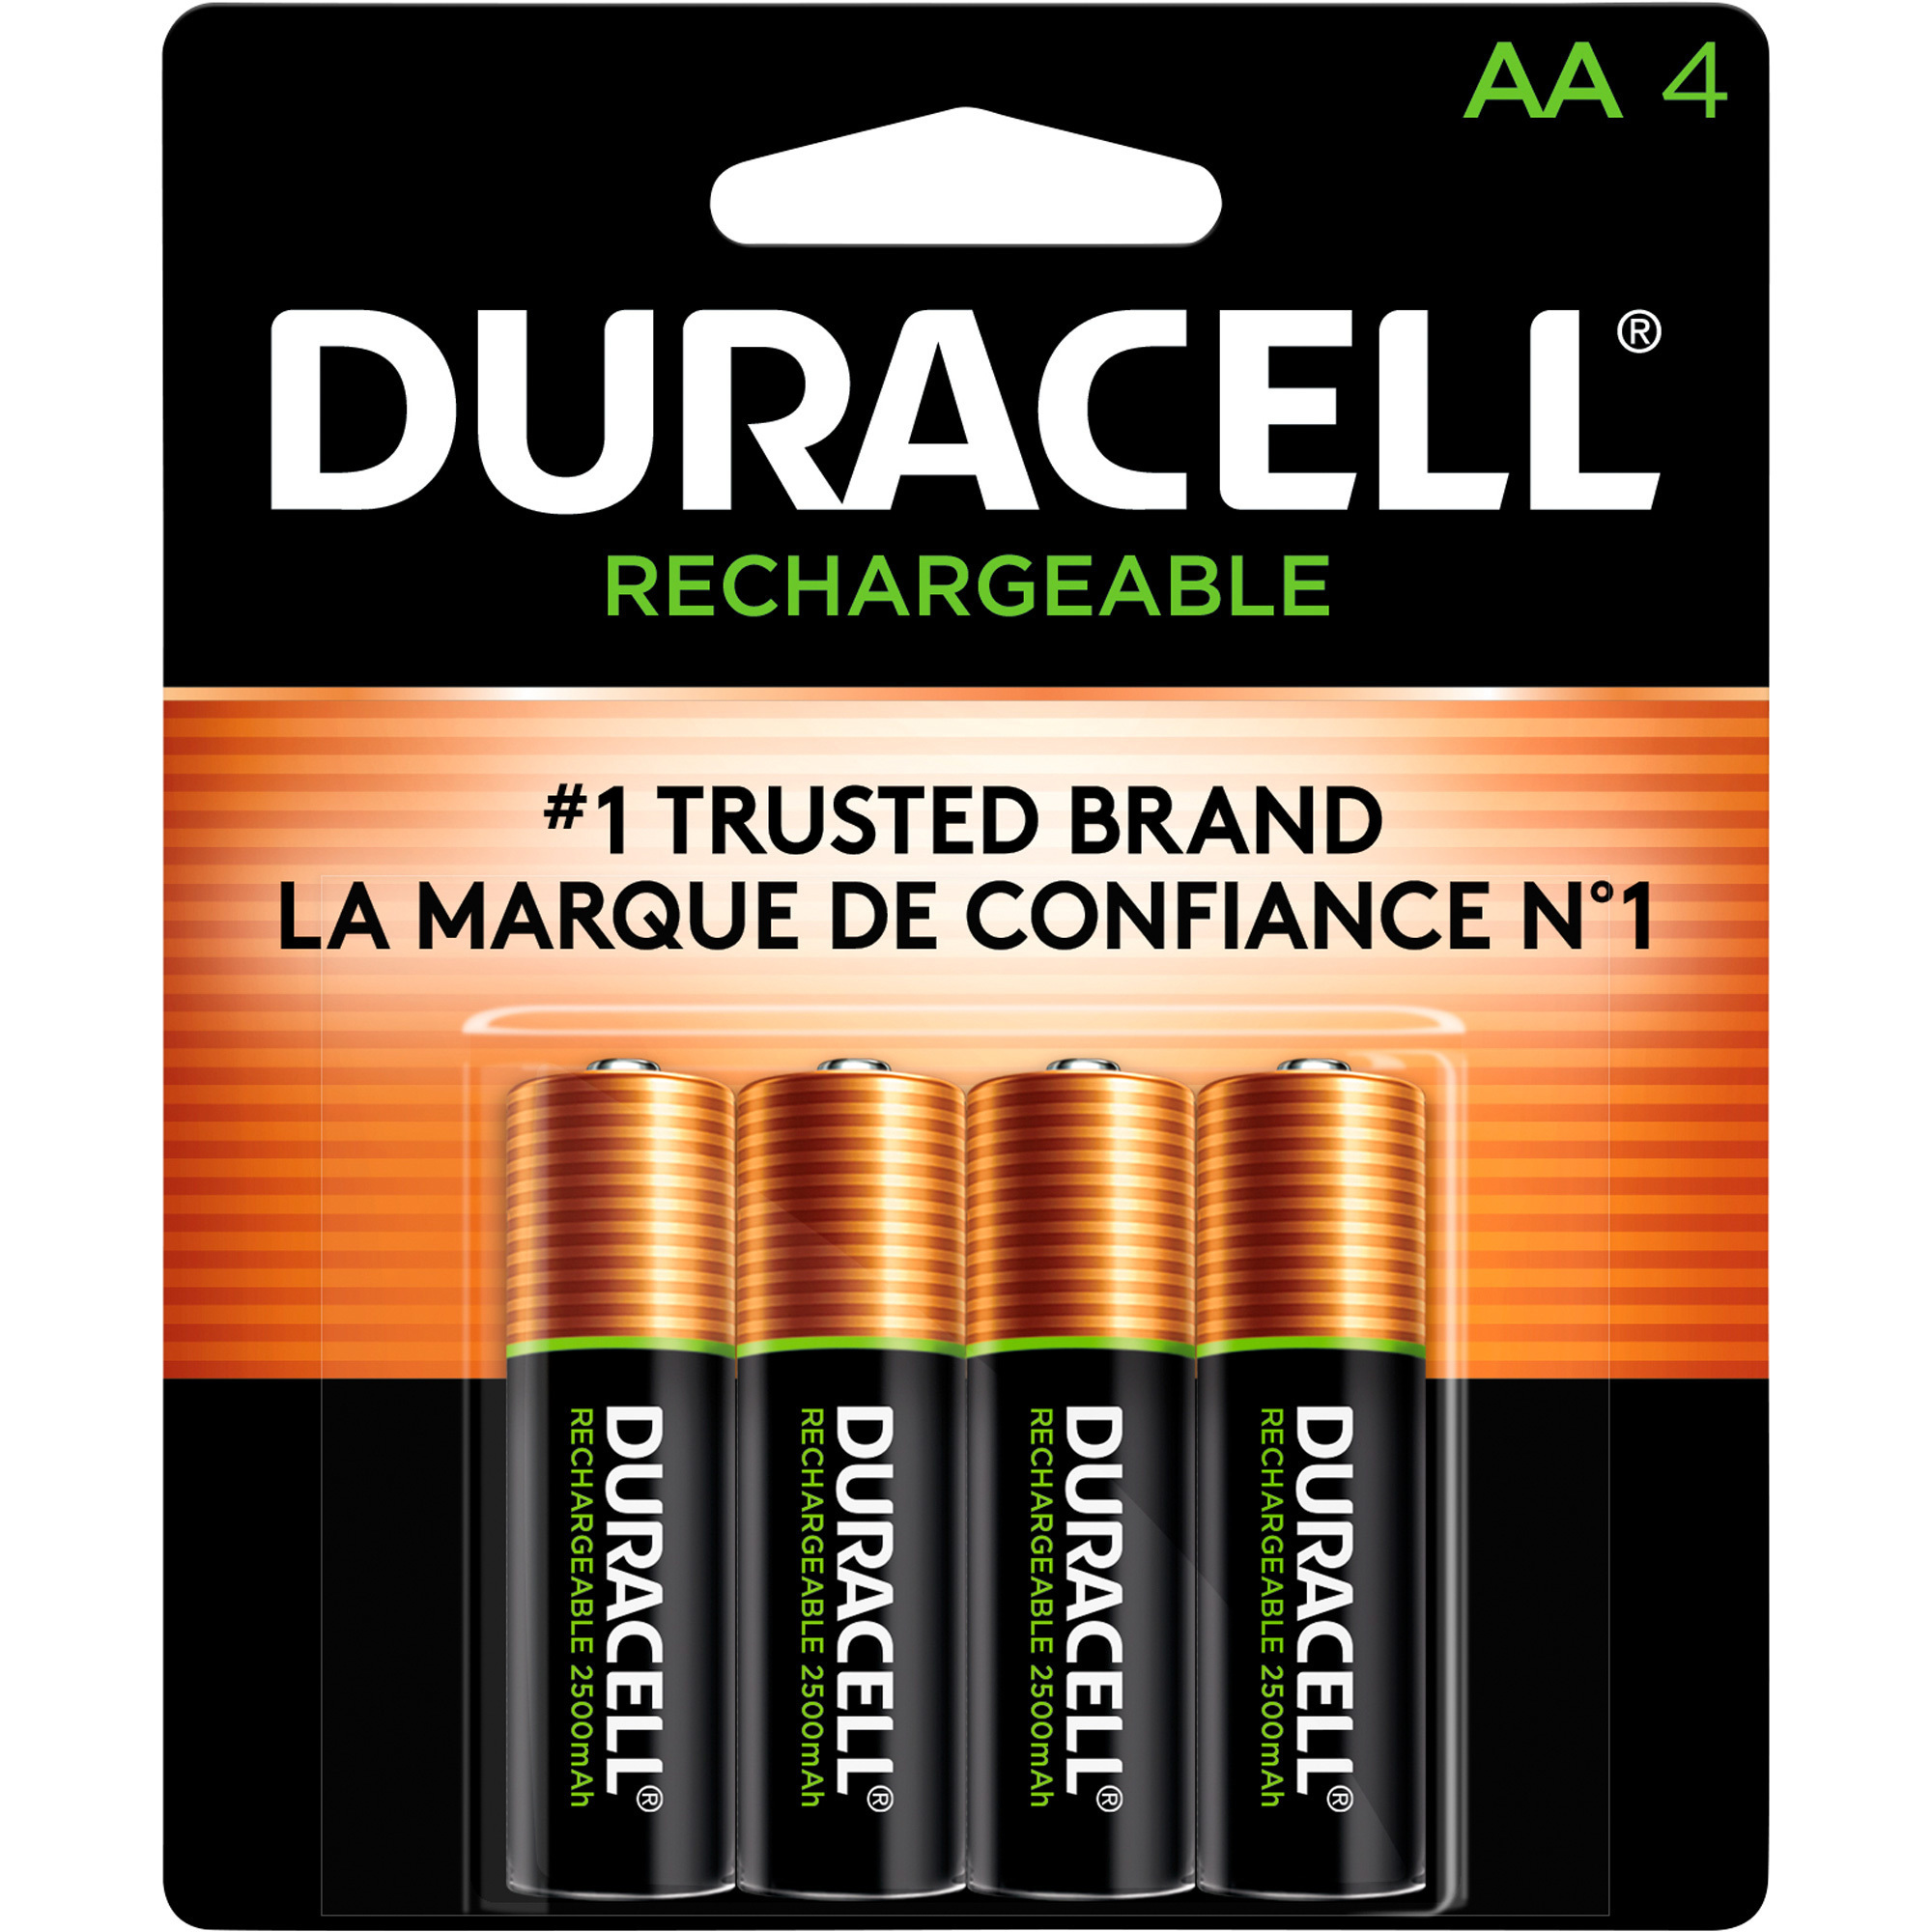 Duracell Rechargeable, Pre-Charged NiMH Batteries â 4-Pack AA